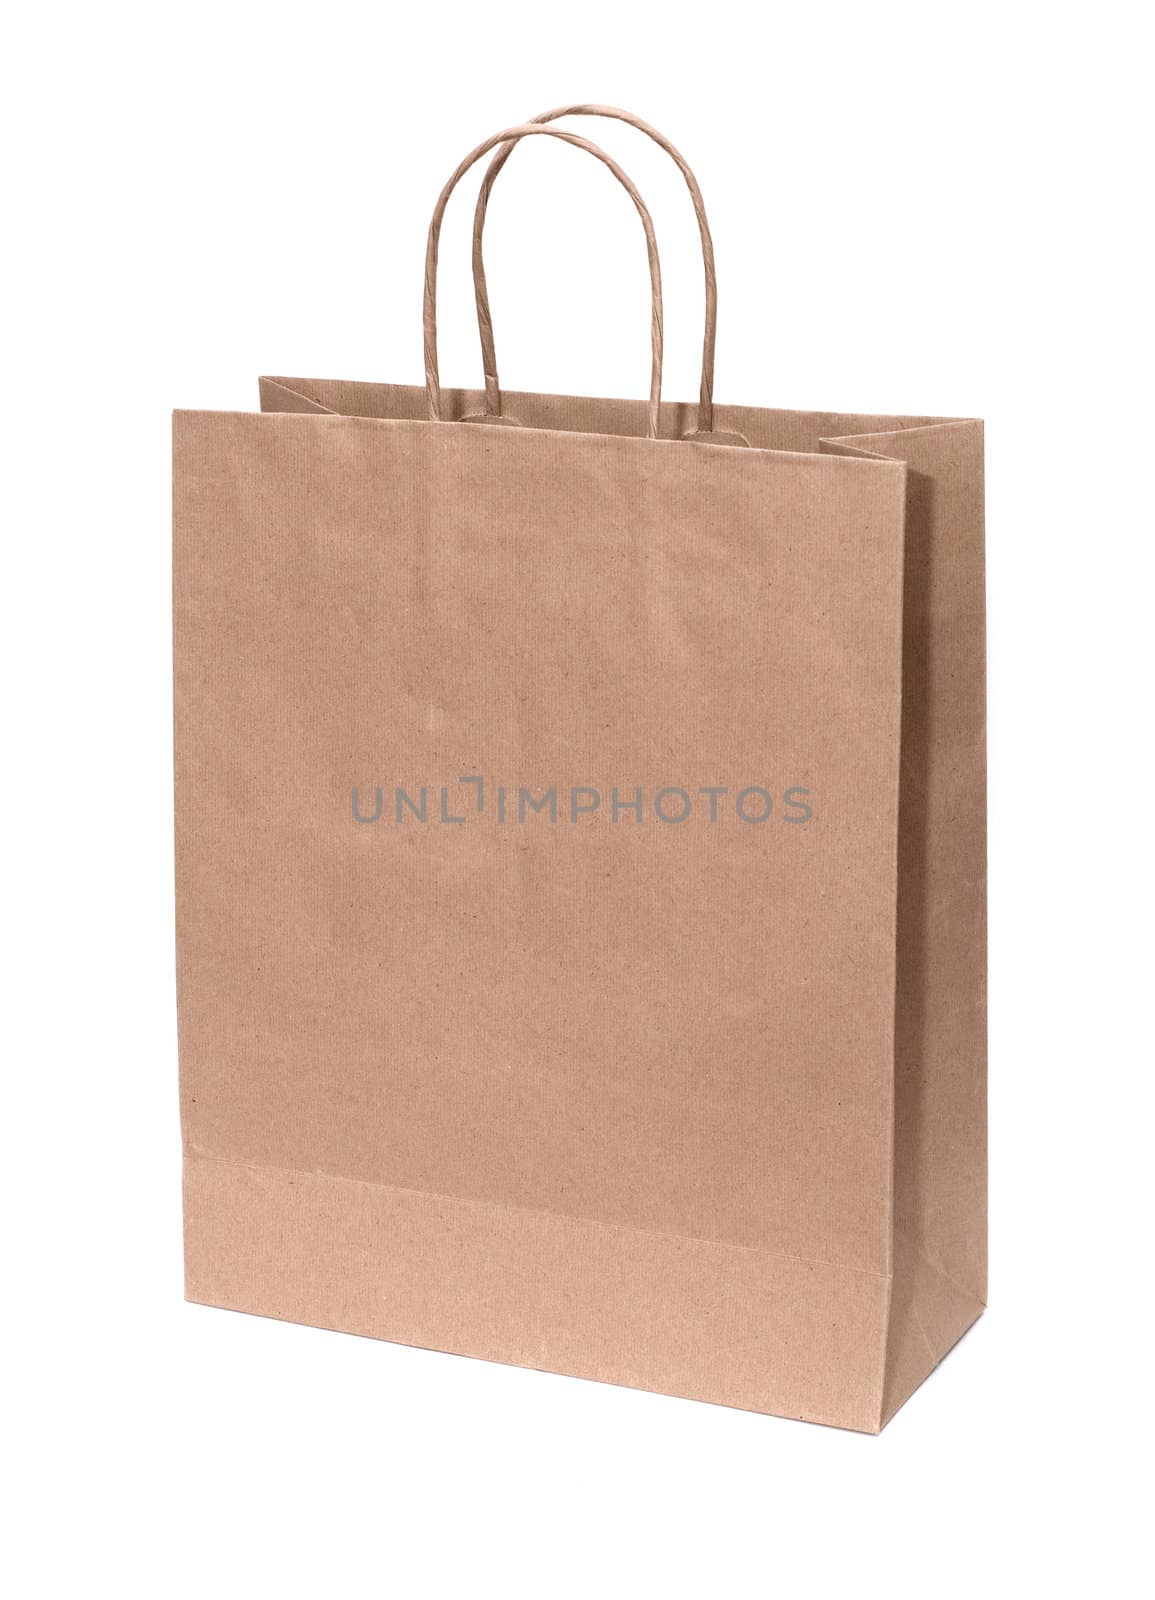 Recyclable paper bag isolated on white background. by DNKSTUDIO